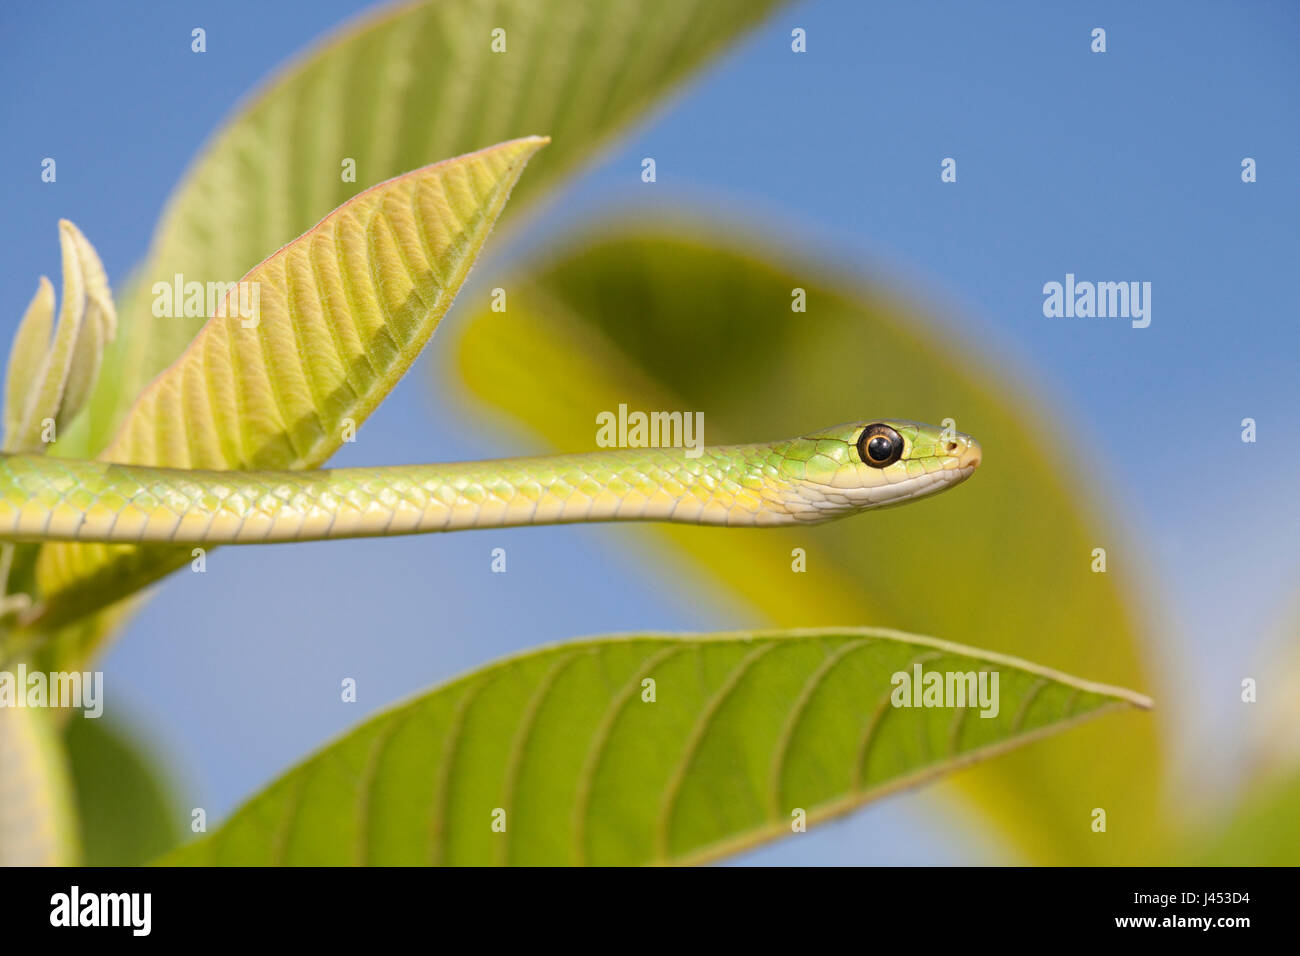 Photo of a Green water snake Stock Photo